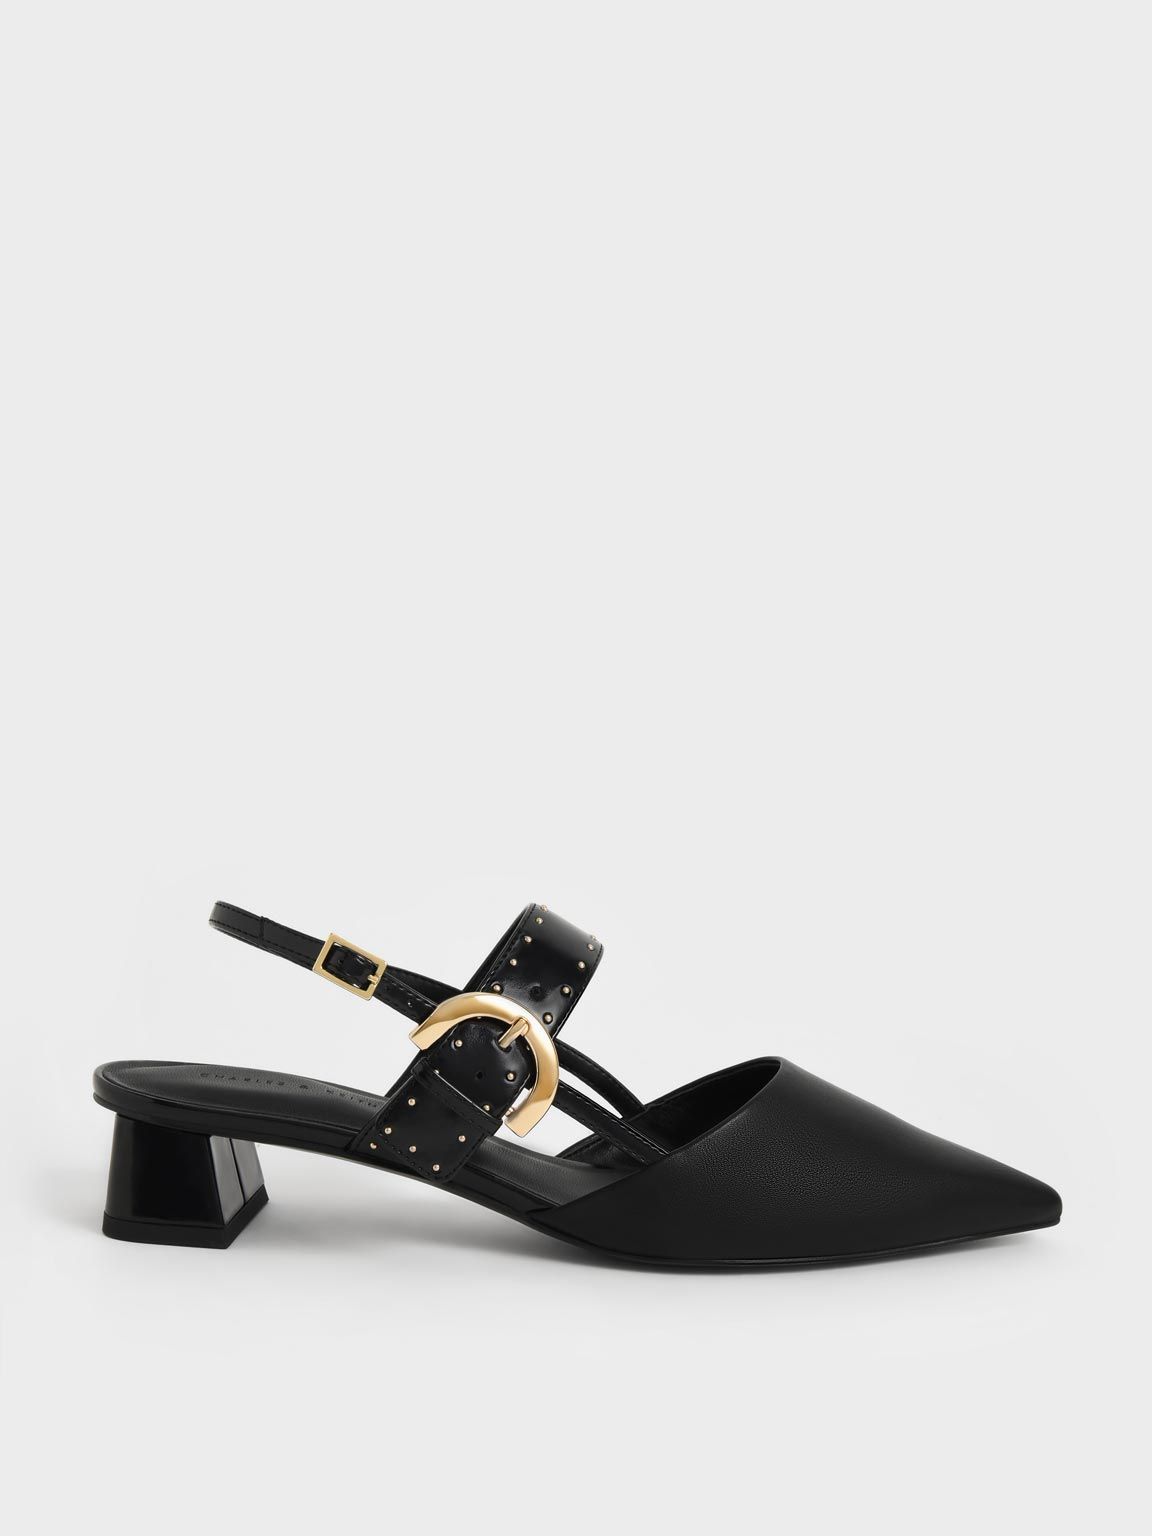 Black Studded Buckled Slingback Pumps | CHARLES &amp; KEITH | Charles & Keith US